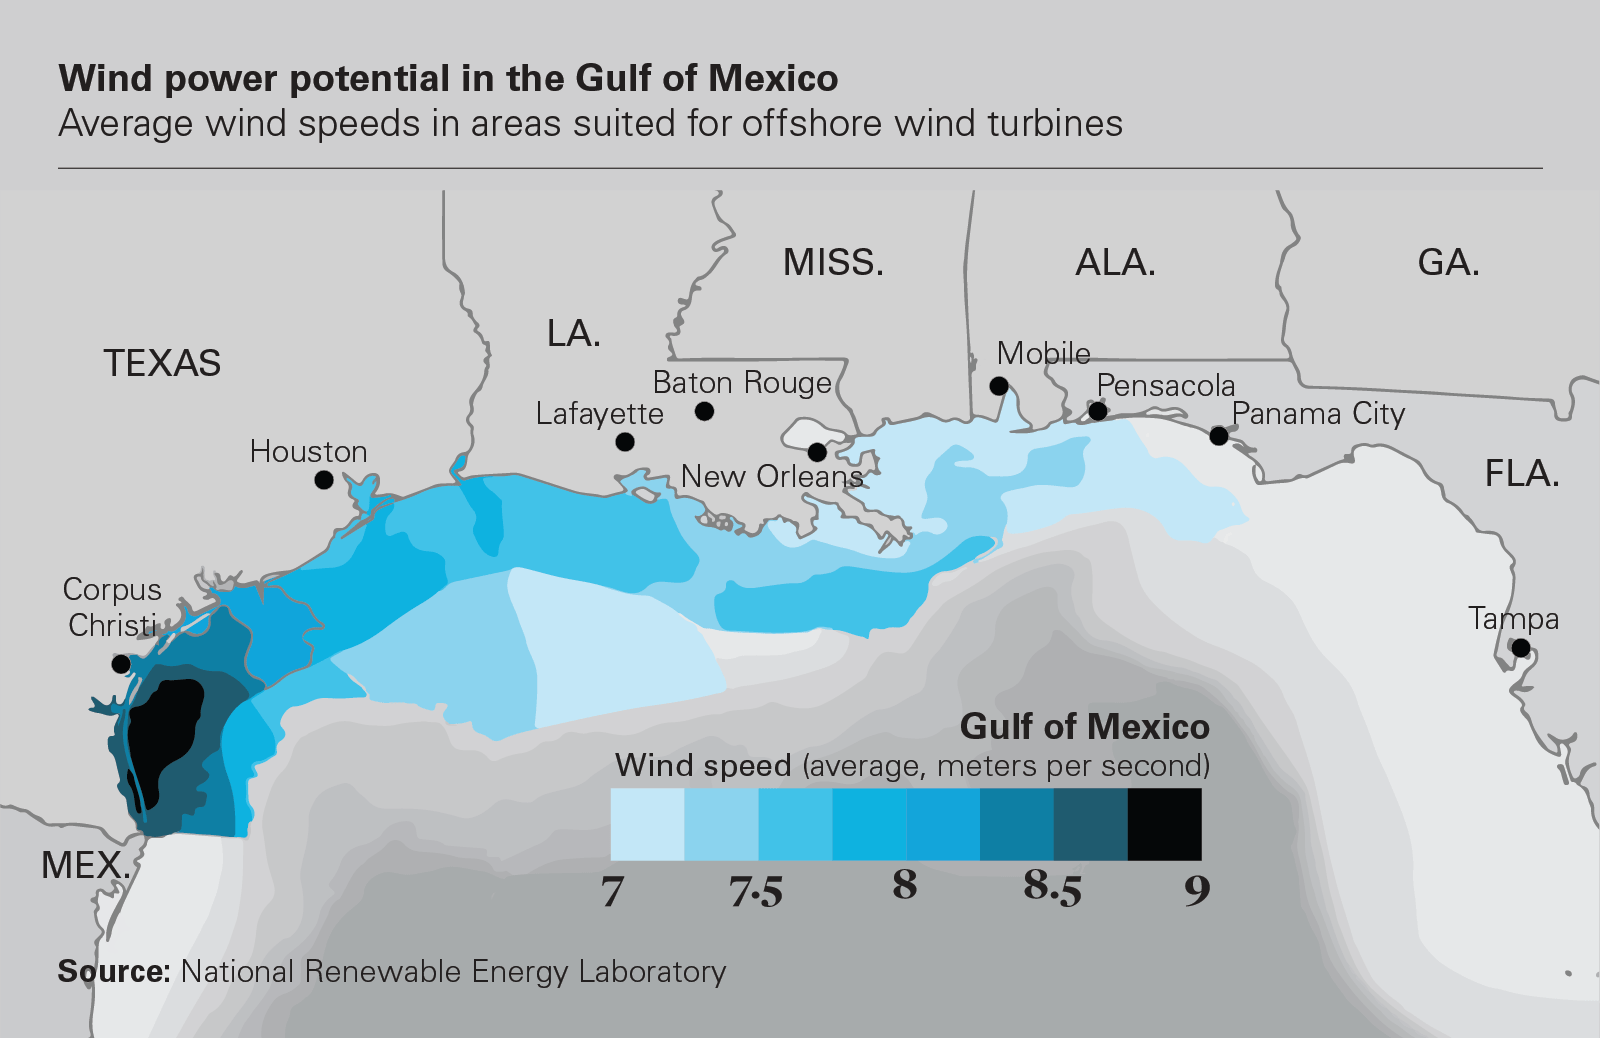 Wind power potential in the Gulf of Mexico